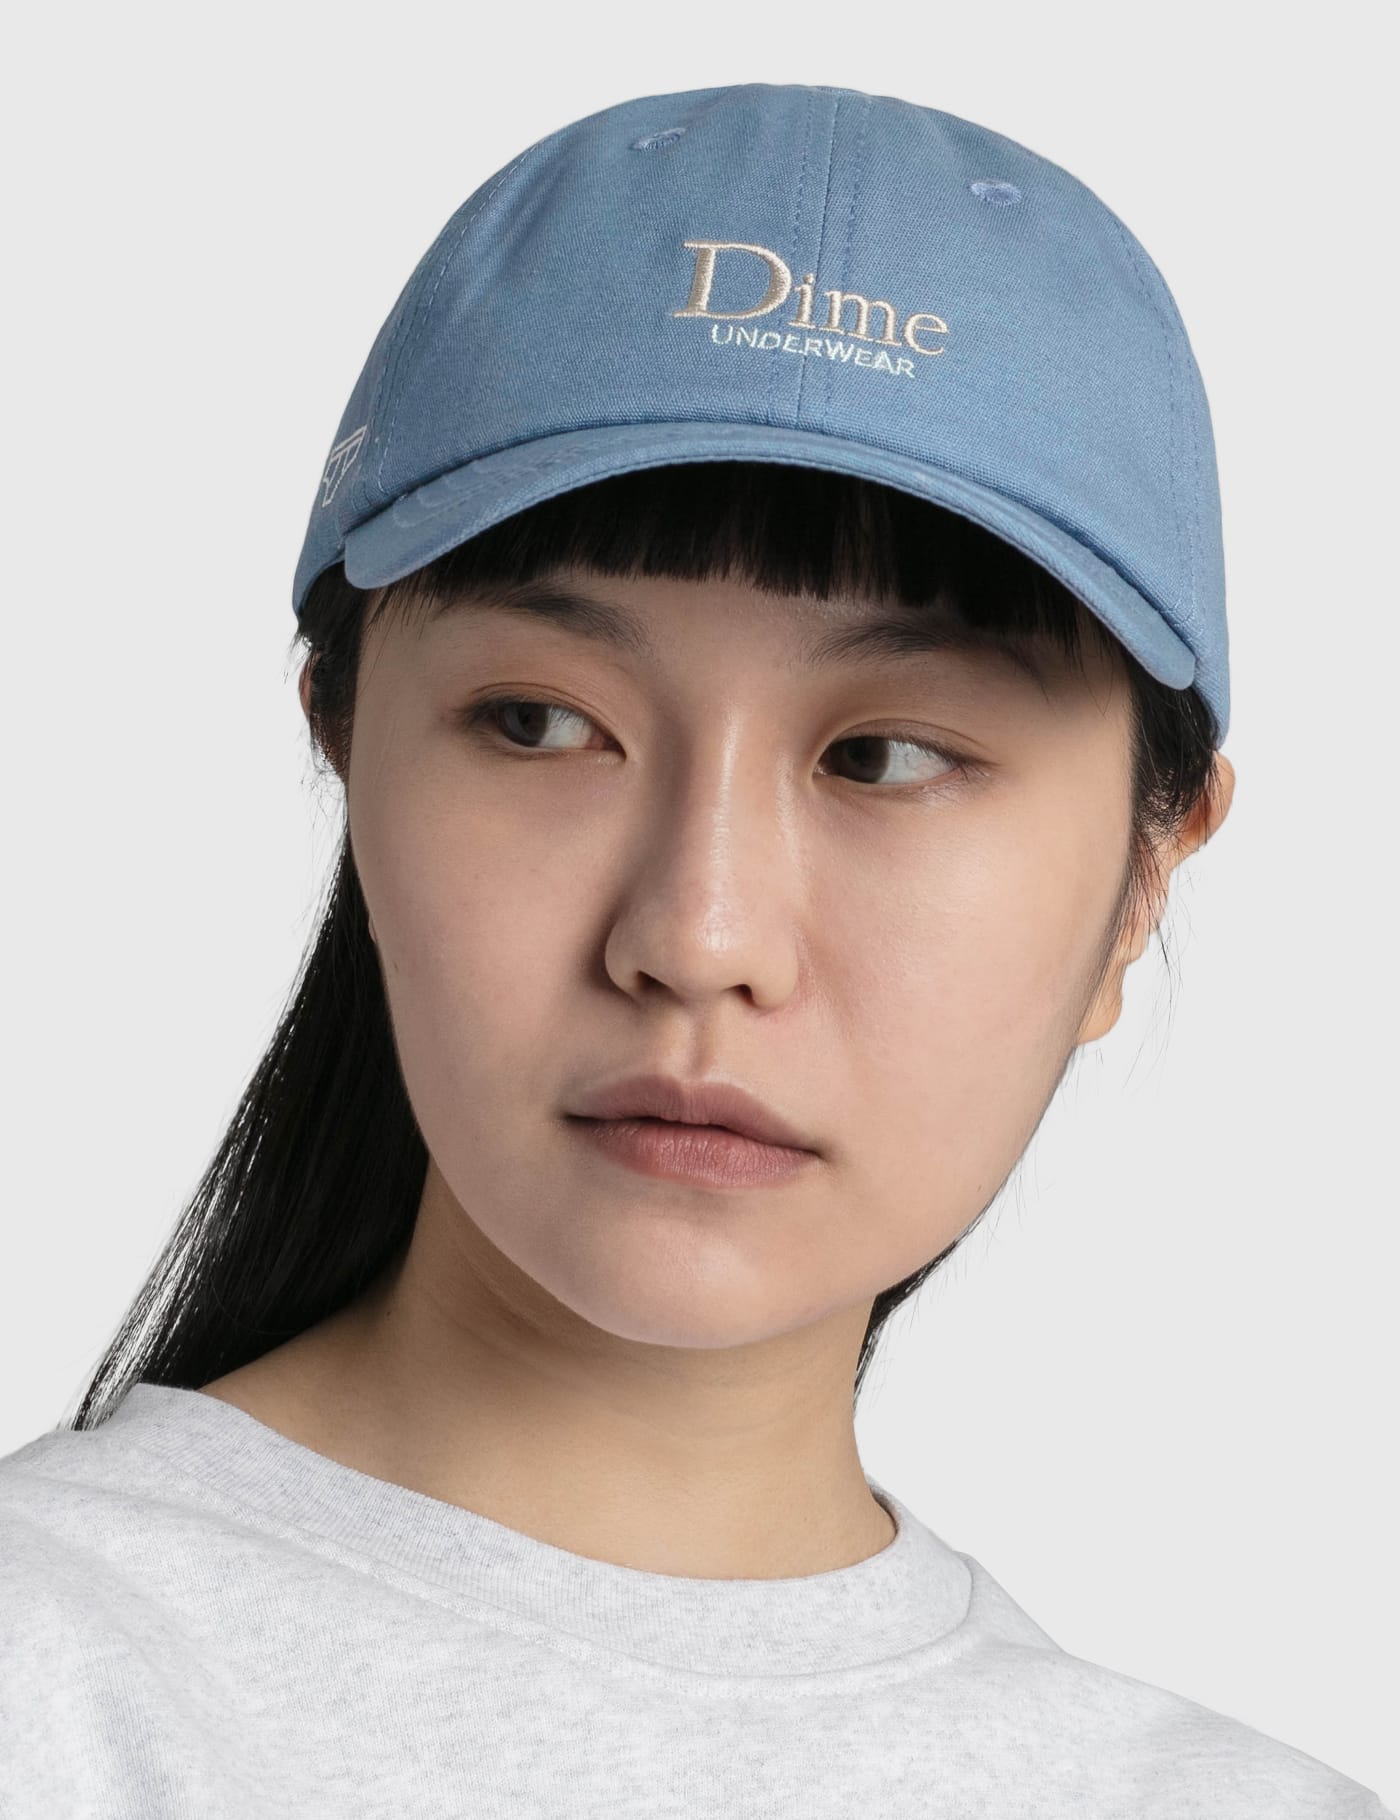 Dime - Dime Underwear Cap | HBX - Globally Curated Fashion and 